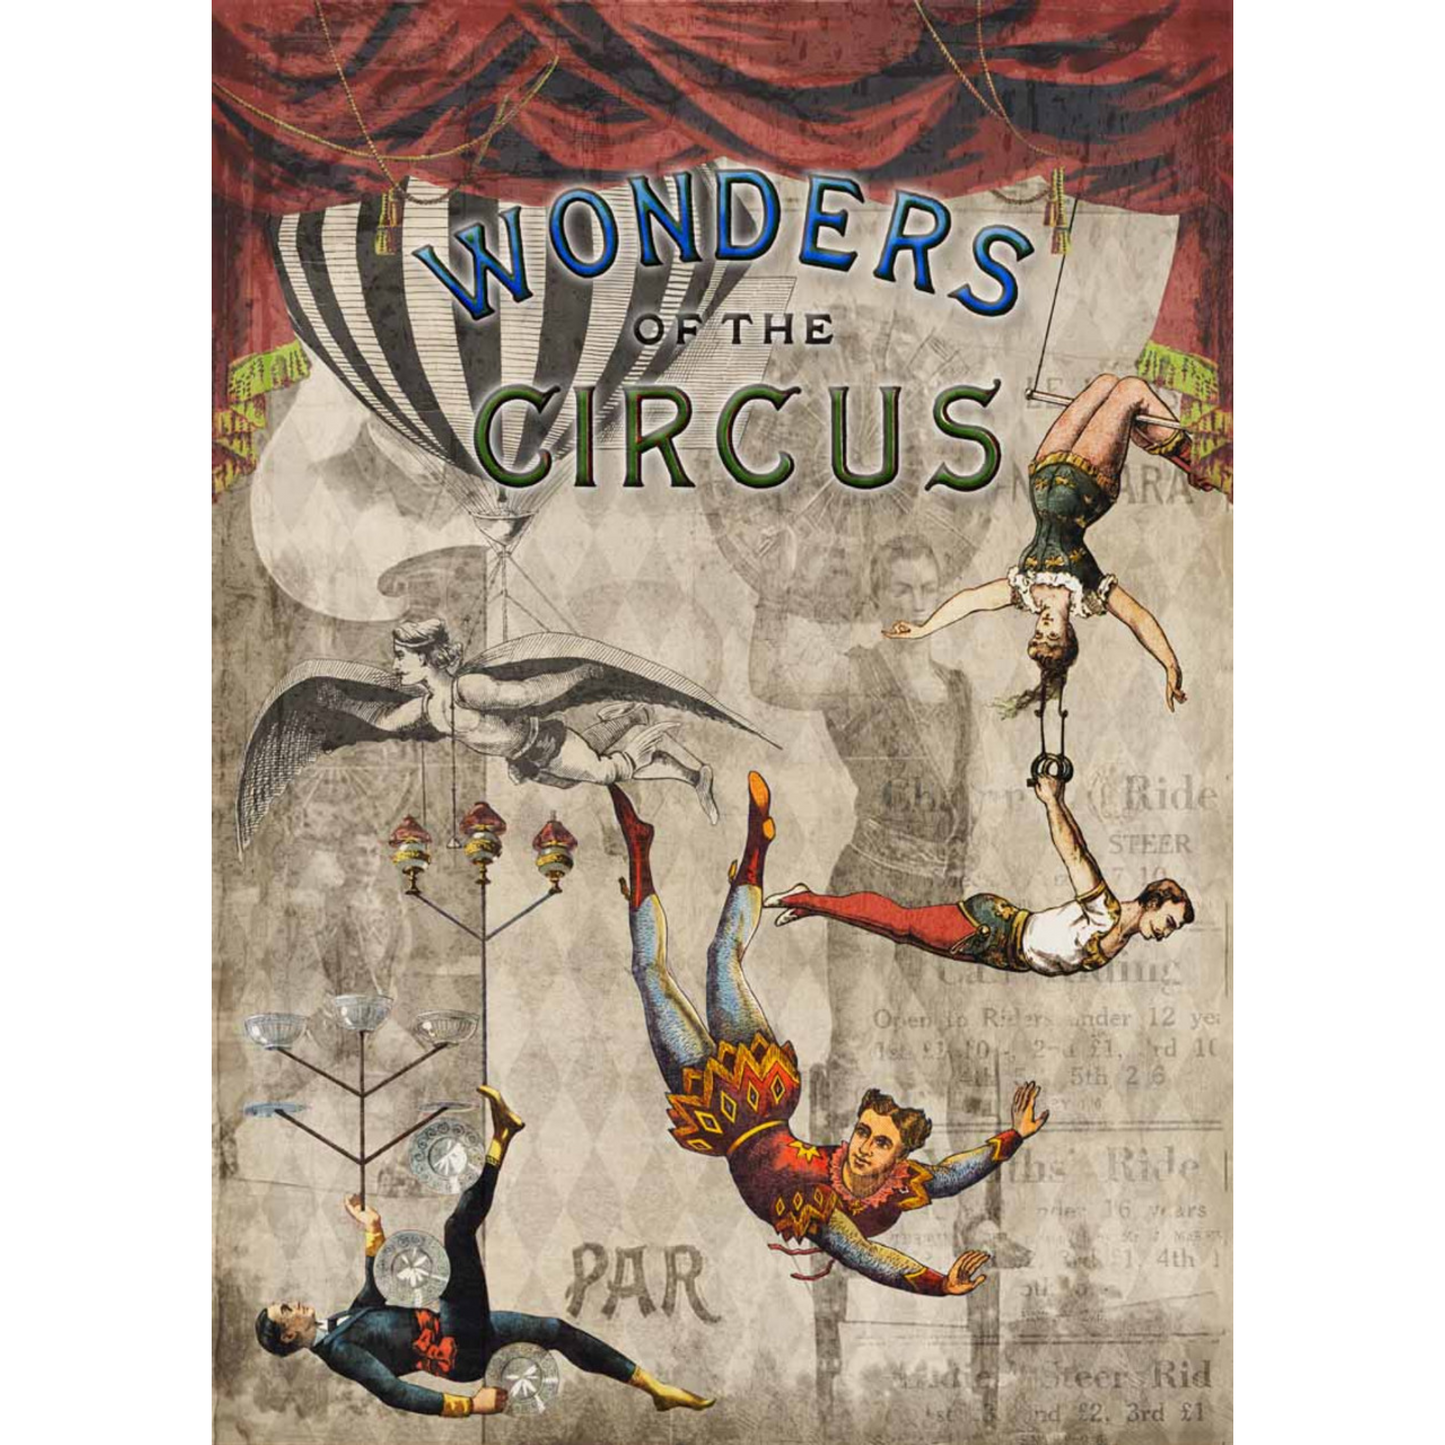 "Wonders of the Circus" decoupage rice paper by Decoupage Queen. Sizes A4 and A3 available at Milton's Daughter.